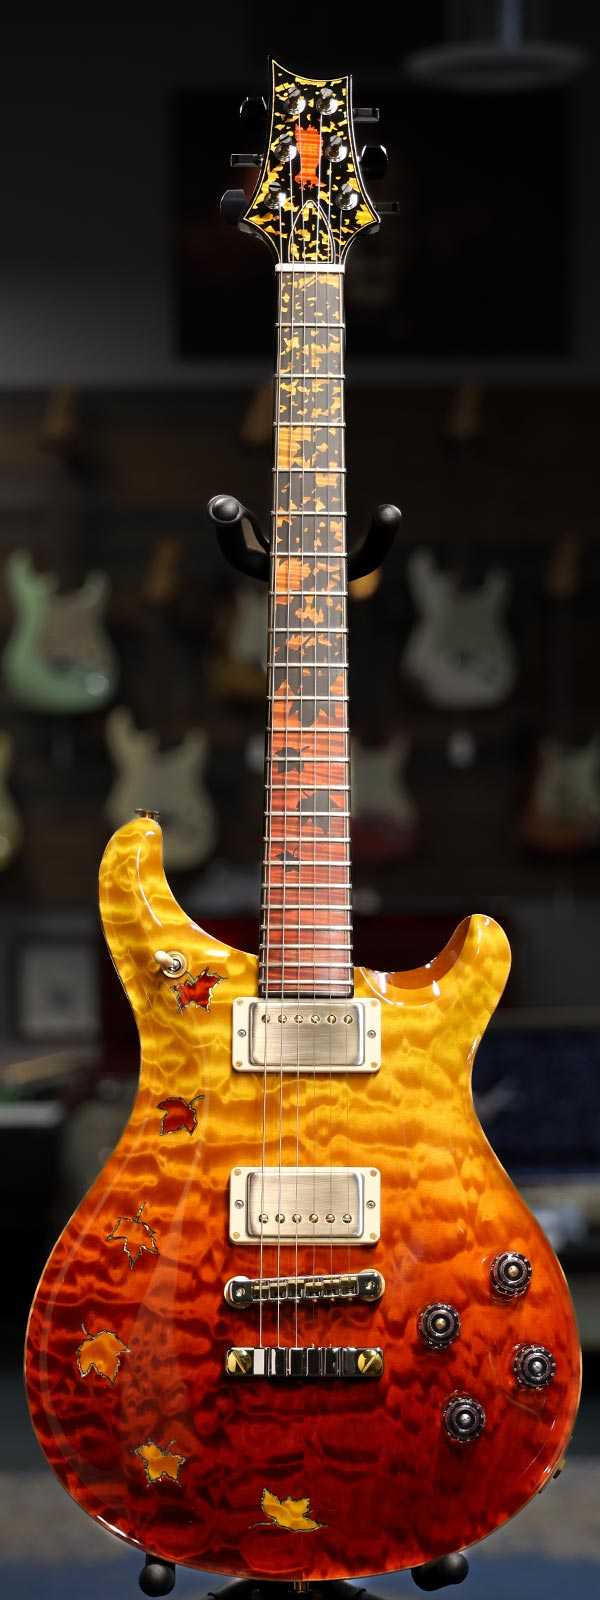 PRS Private Stock 9413 Falling Leaves Curly Maple/Ebony Fretboard Quilt Top McCarty 594 Autumn Fade